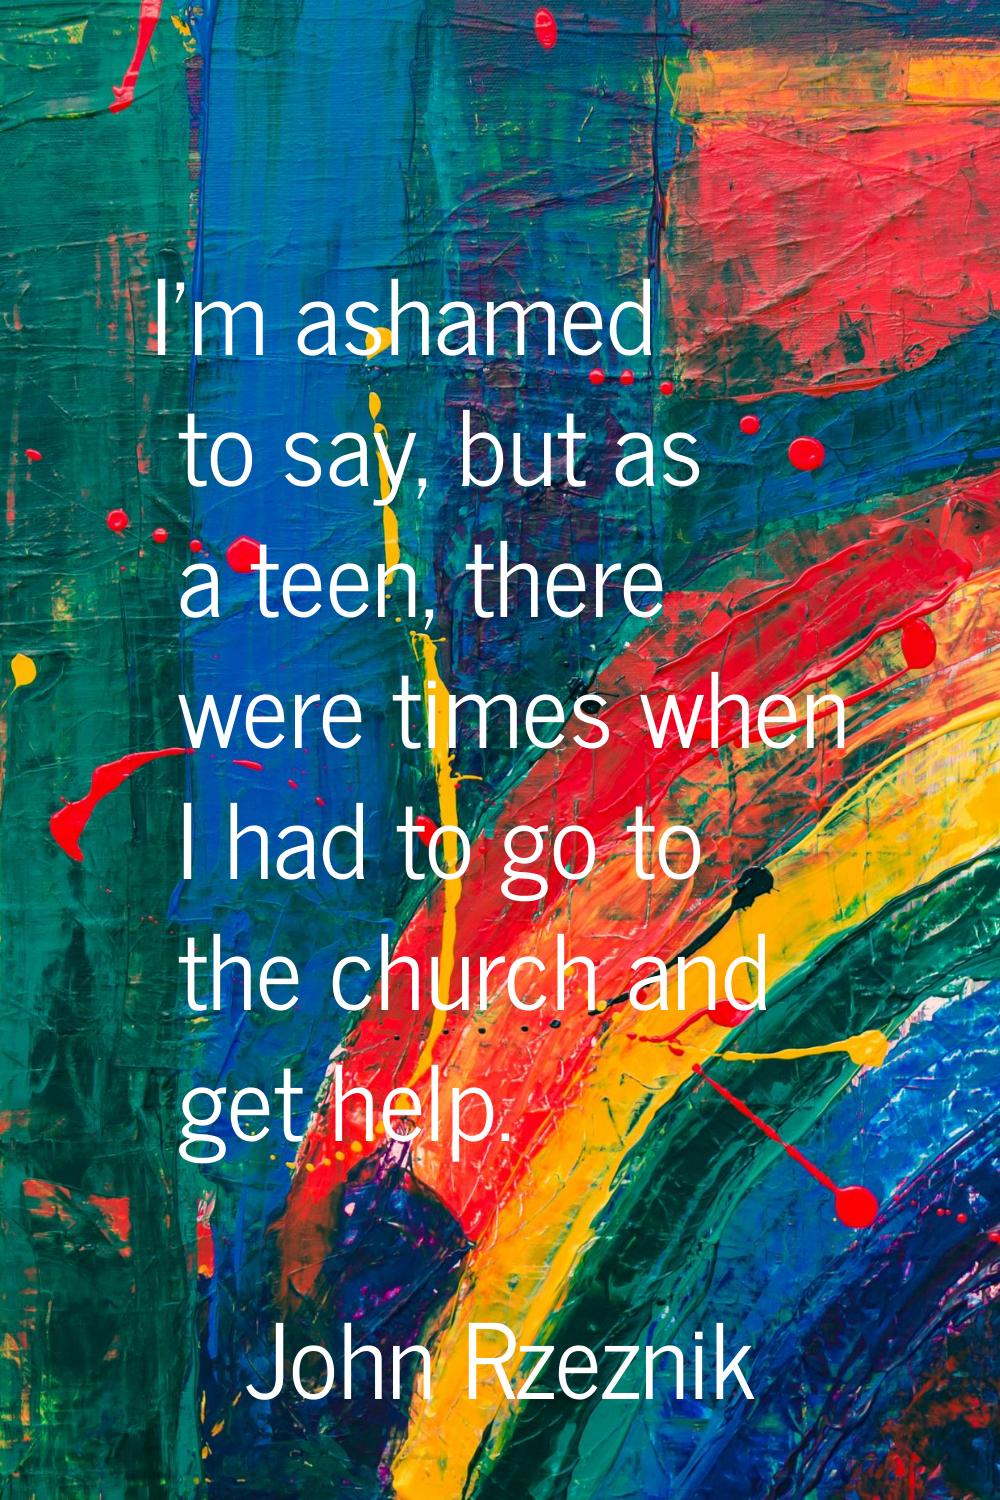 I'm ashamed to say, but as a teen, there were times when I had to go to the church and get help.